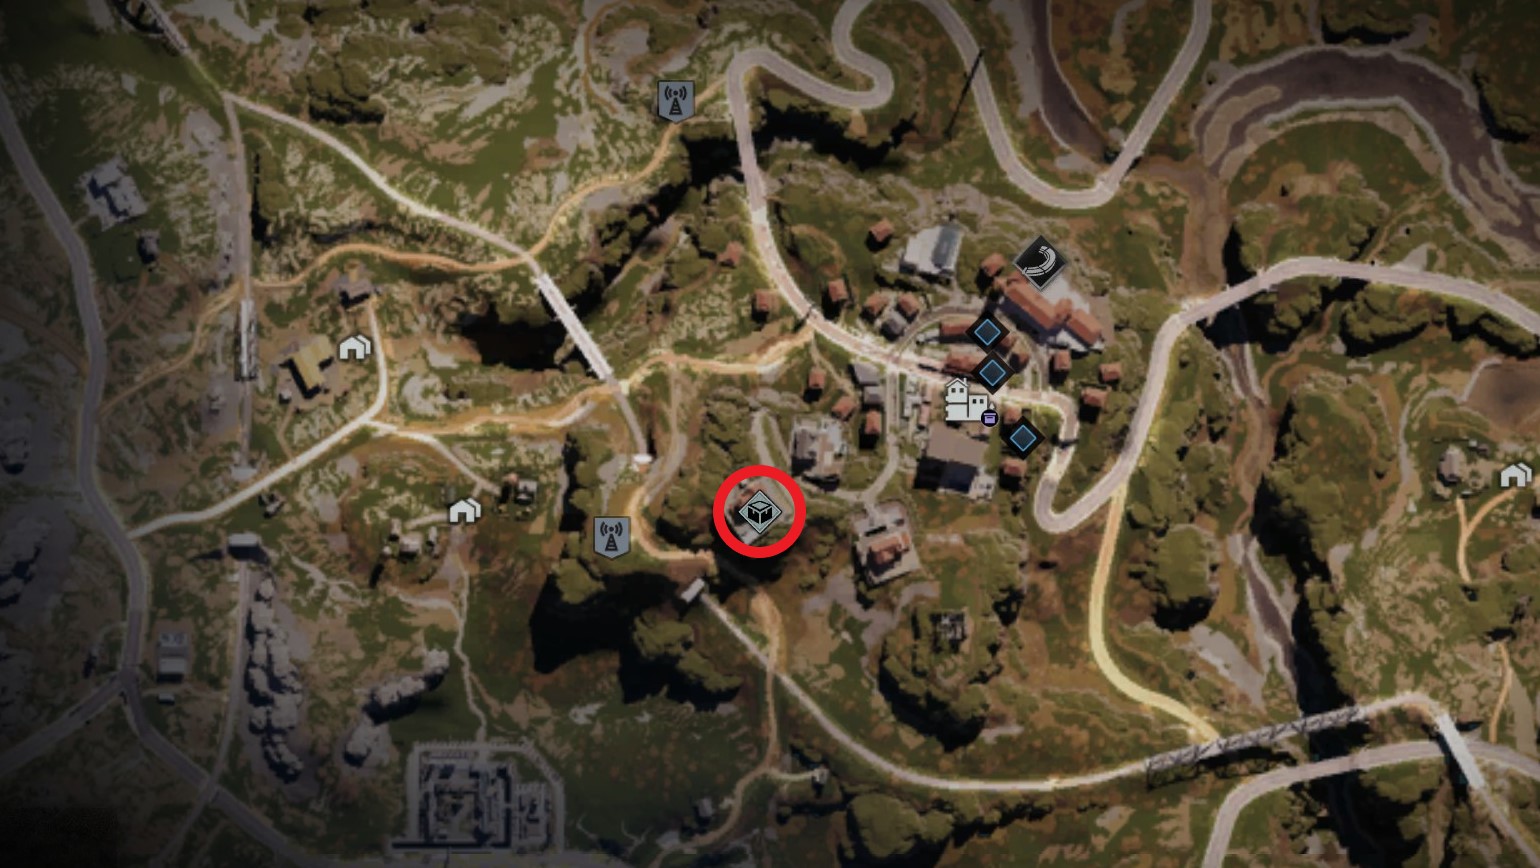 Once Human High Banks gear crate location